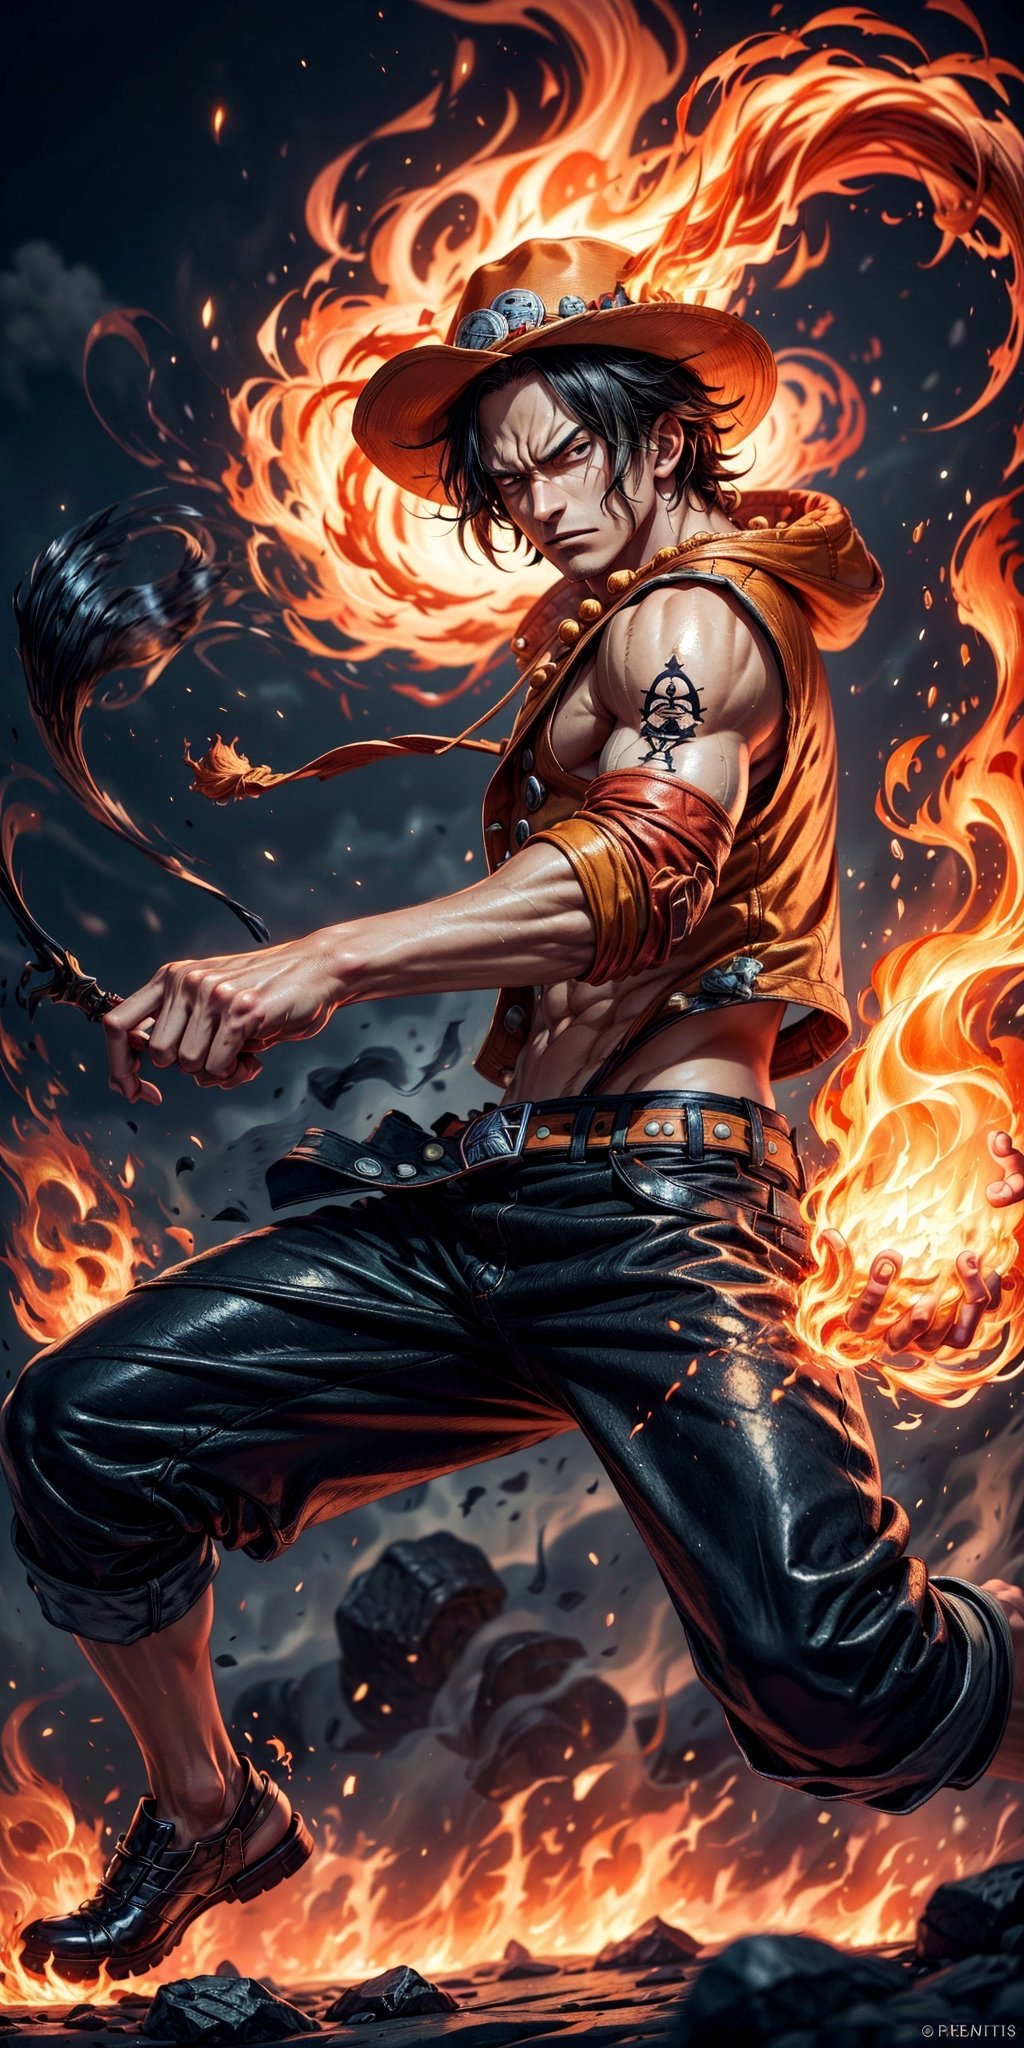 Create the iconic One Piece character, Portgas D. Ace:

"Visualize the legendary Portgas D. Ace, a prominent character from the One Piece anime. He possesses a lithe and muscular physique, reflecting his formidable strength.

Ace is clad in his signature attire, wearing a stylish hat that adds to his iconic appearance. His defining ability is his mastery over fire, and his hands should be ablaze with flickering flames, showcasing his power to manipulate fire at will.

Set him against a background of raging fire, with flames dancing in the backdrop, creating an inferno-like atmosphere. The flames should emphasize his fiery abilities and his unwavering resolve.

Capture this image to pay homage to Portgas D. Ace's character, showcasing his powerful presence and his association with the element of fire, a central theme in his story arc within the One Piece series." ((Perfect face)), ((perfect hands)), ((perfect body)), [perfect image of Portgas D. Ace(one piece anime character)]